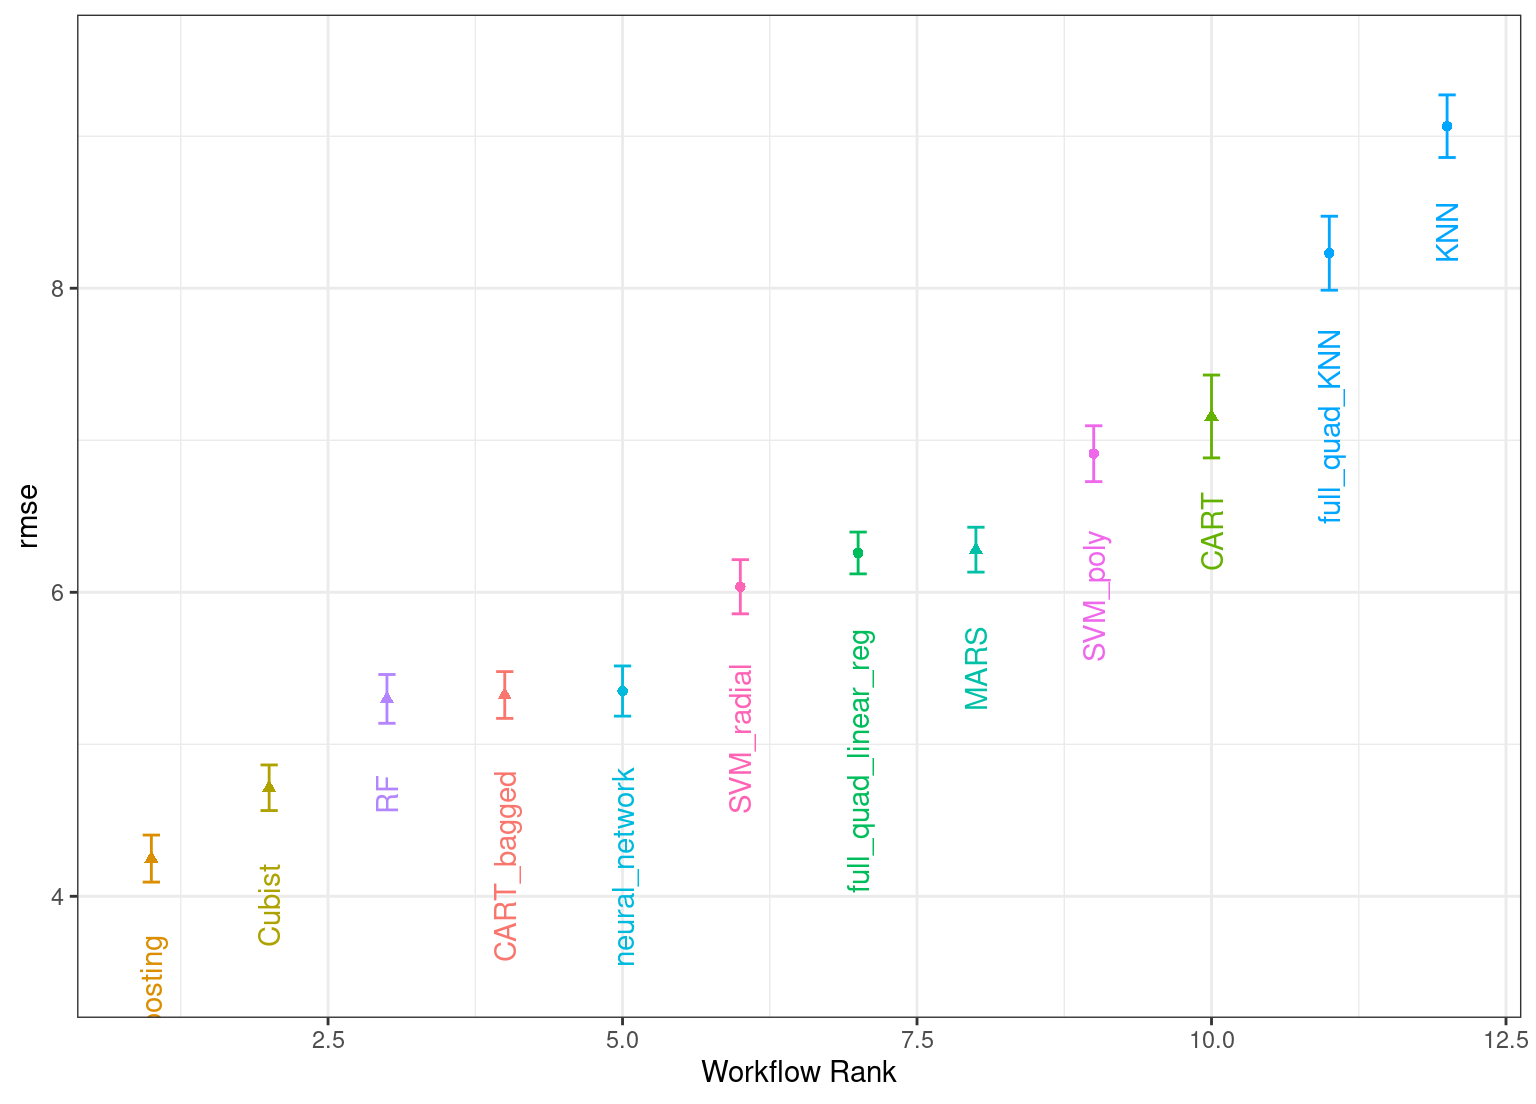 Estimated RMSE (and approximate confidence intervals) for the best model configuration in each workflow. The y axis is the estimated RMSE and the x axis is the model rank based on RMSE. Cubist rules and boosted trees show the smallest RMSE values. 